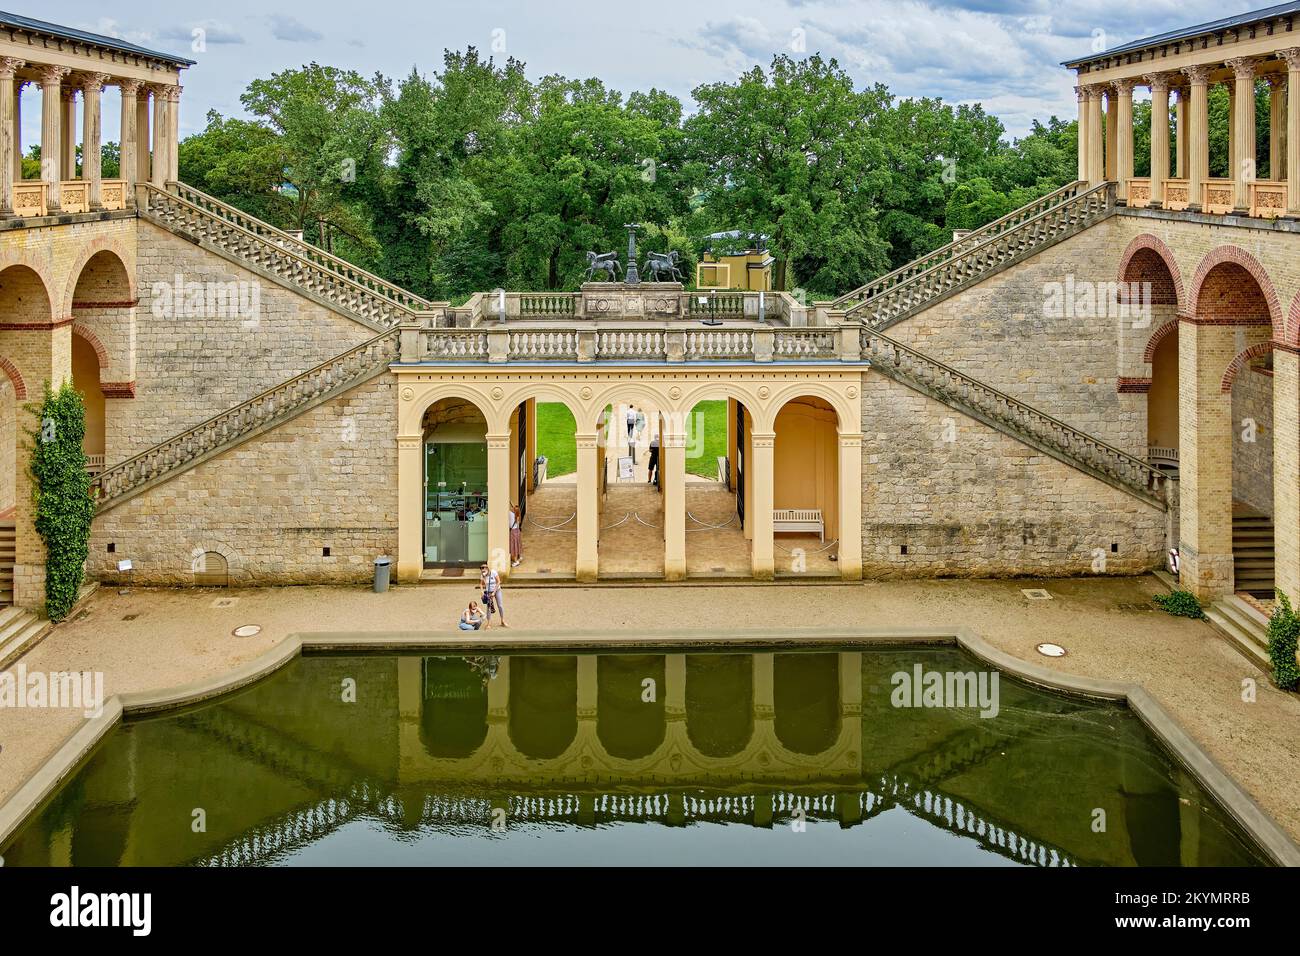 The Belvedere on Pfingstberg hill, built as a vantage point and palace in Italianate neo-Renaissance style, Potsdam, Brandenburg, Germany. Stock Photo